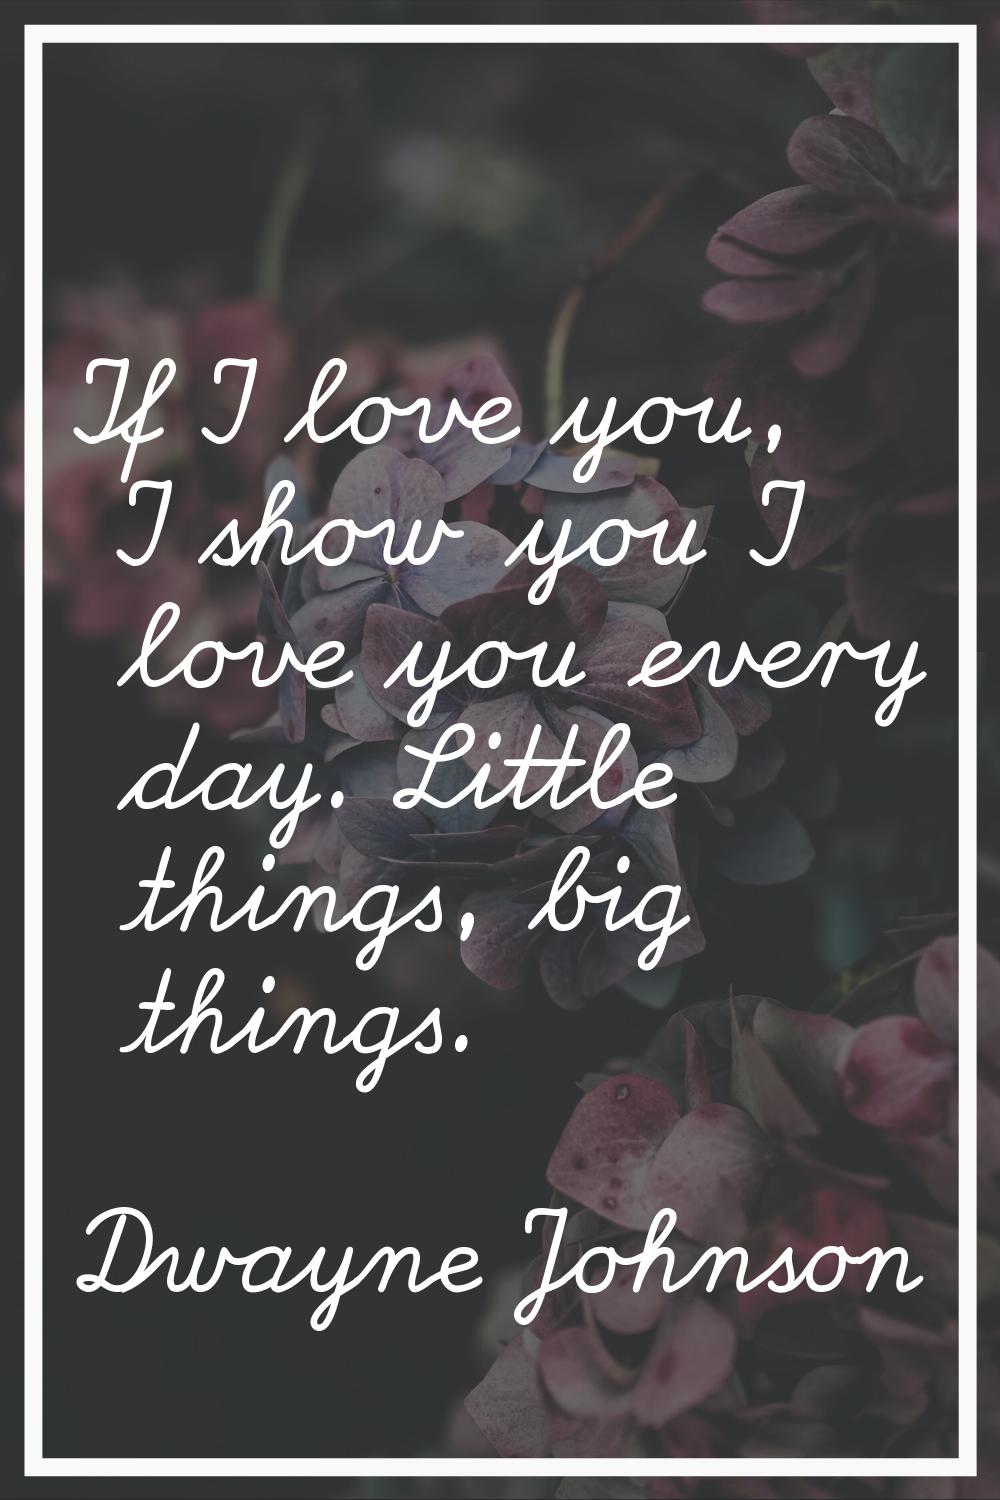 If I love you, I show you I love you every day. Little things, big things.